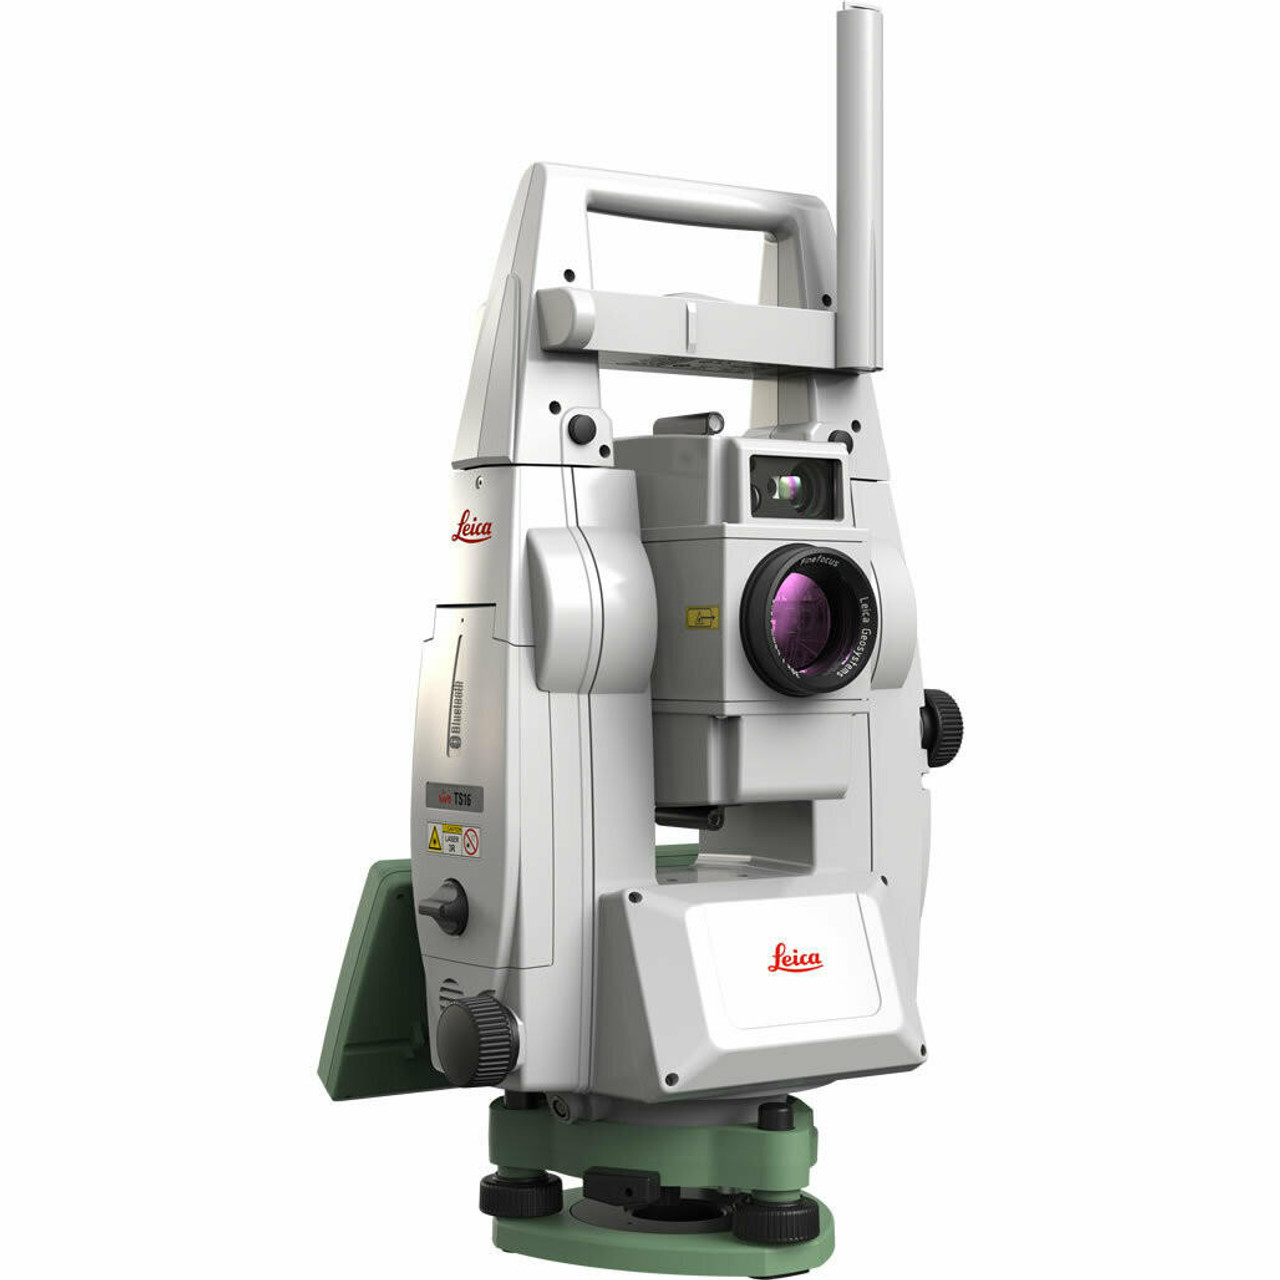 Leica Geosystems Leica TS16 1 R500 Robotic Total Station Package